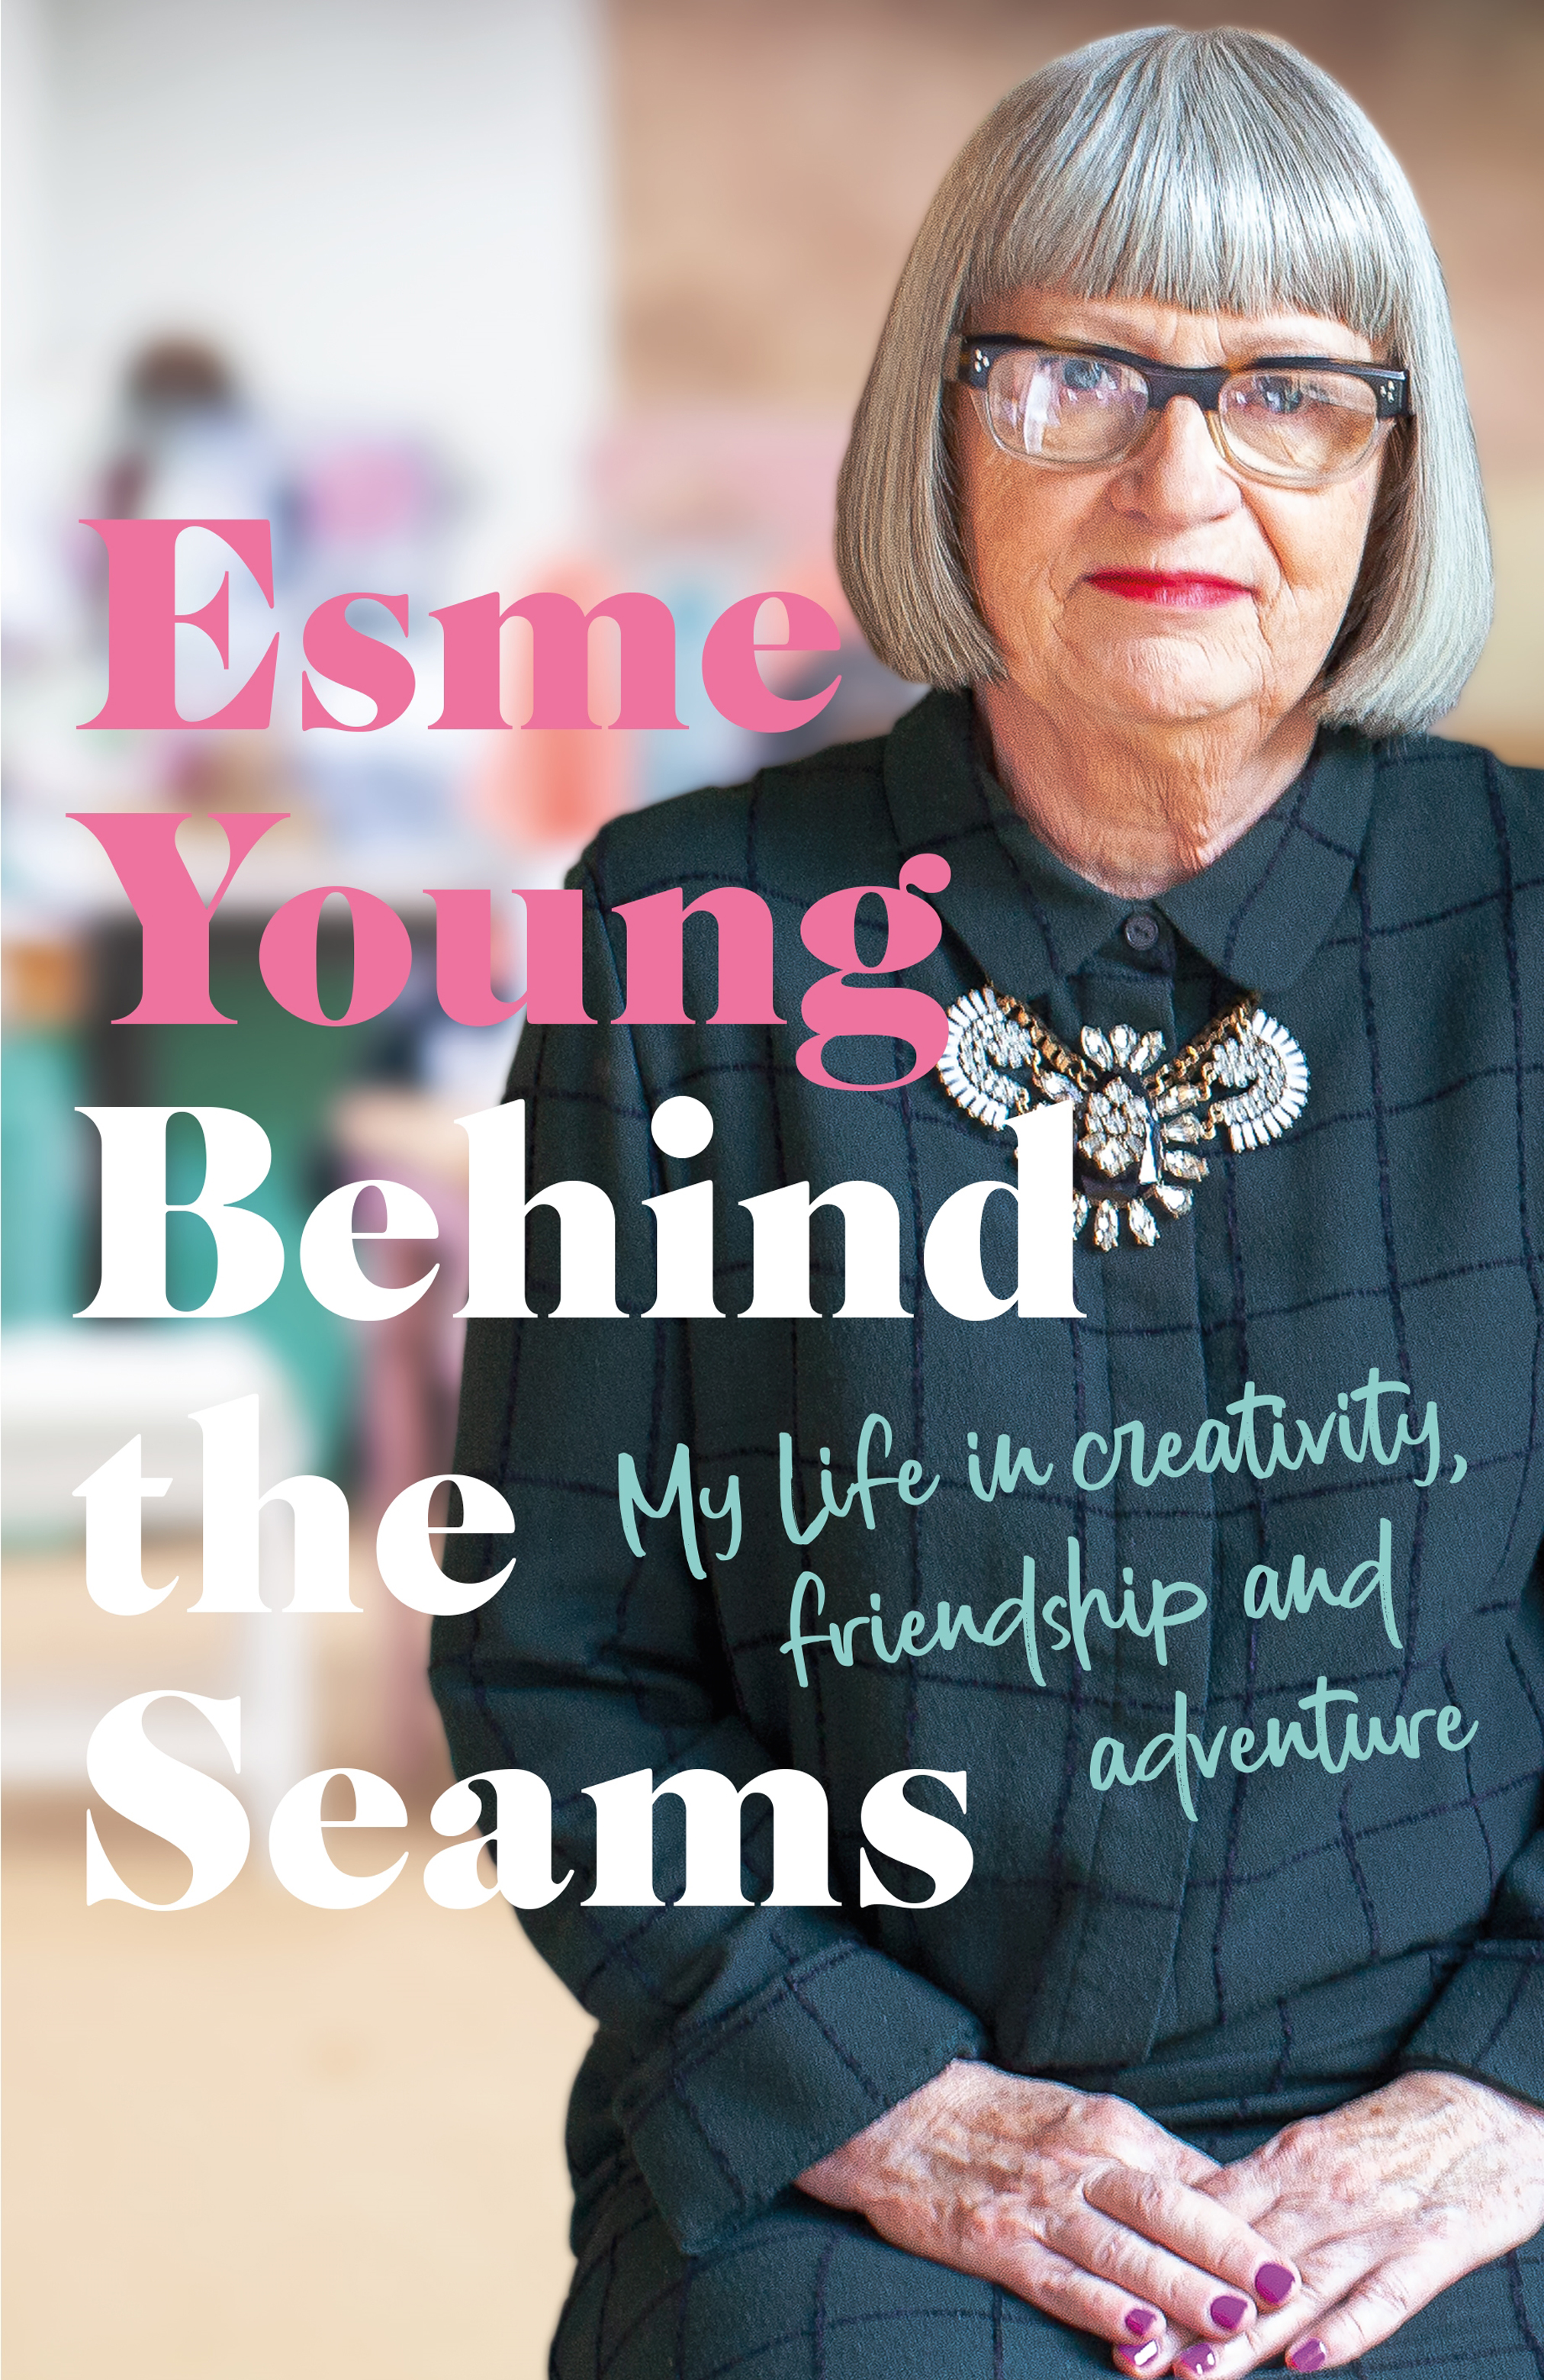 Behind The Seams by Esme Young (